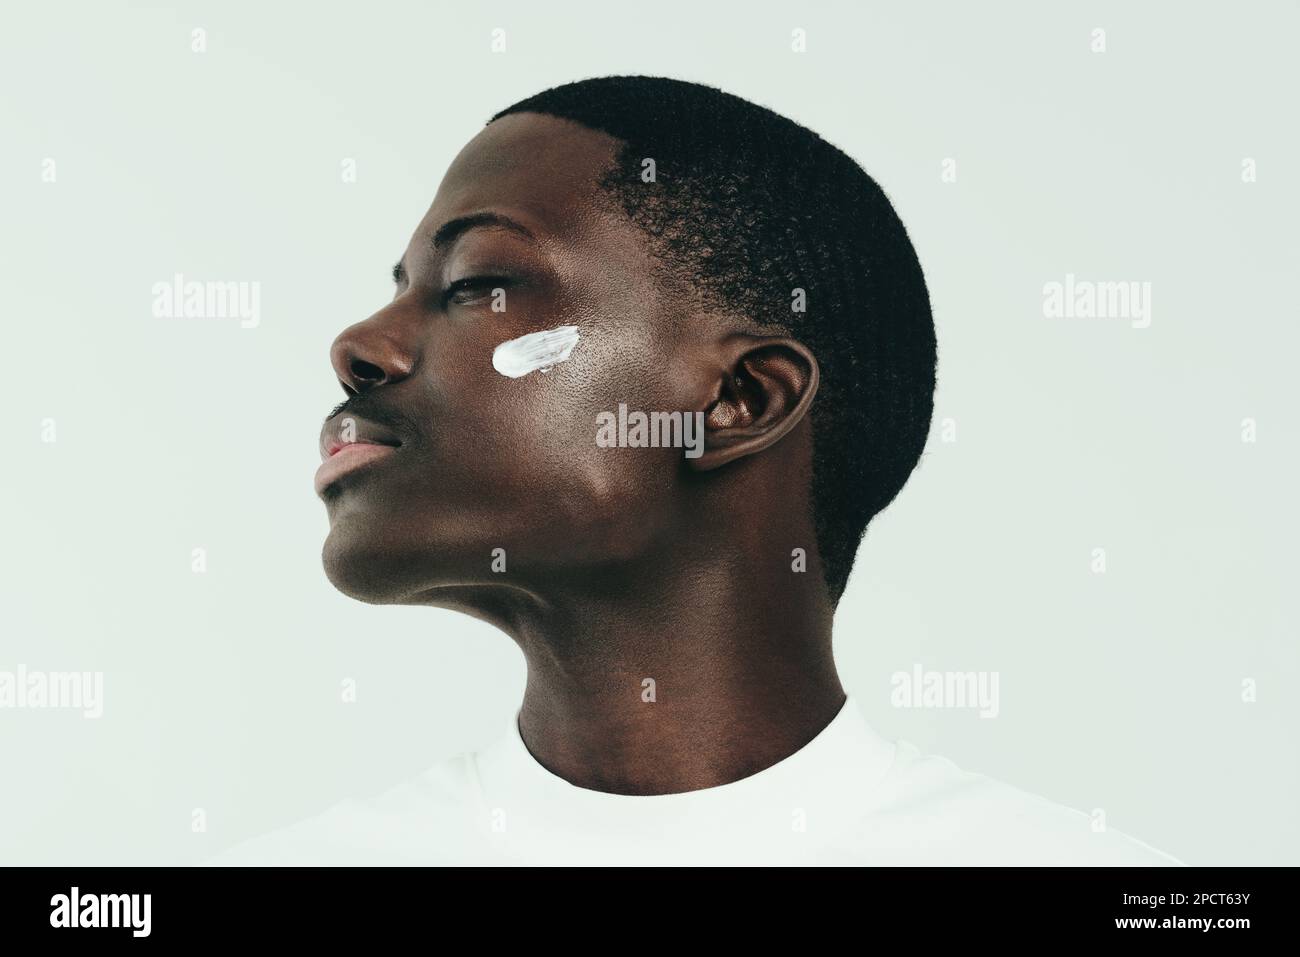 Young black man taking care of his skin, applying some nourishing face cream to keep it moisturized and glowing. With his eyes closed, he savors the r Stock Photo